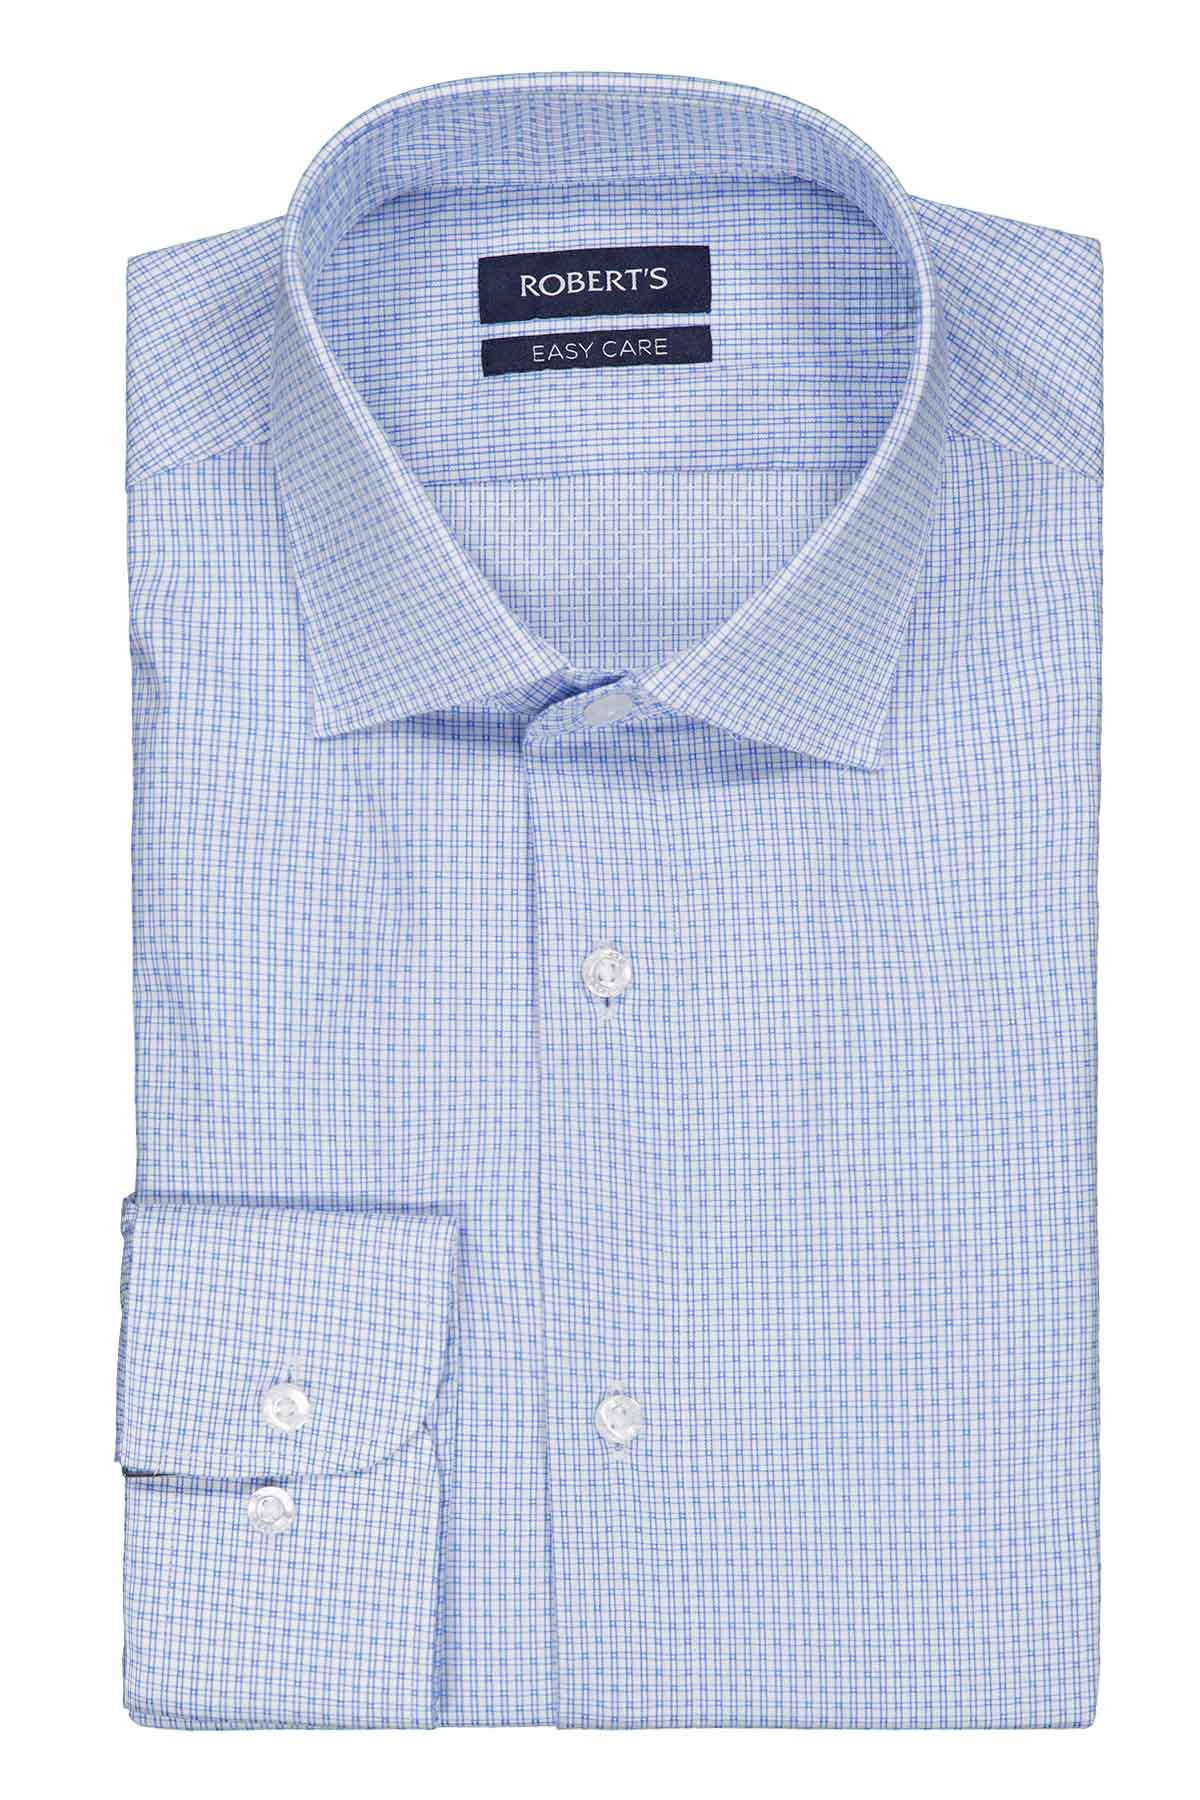 Camisa Formal Roberts Easy Care Color Azul